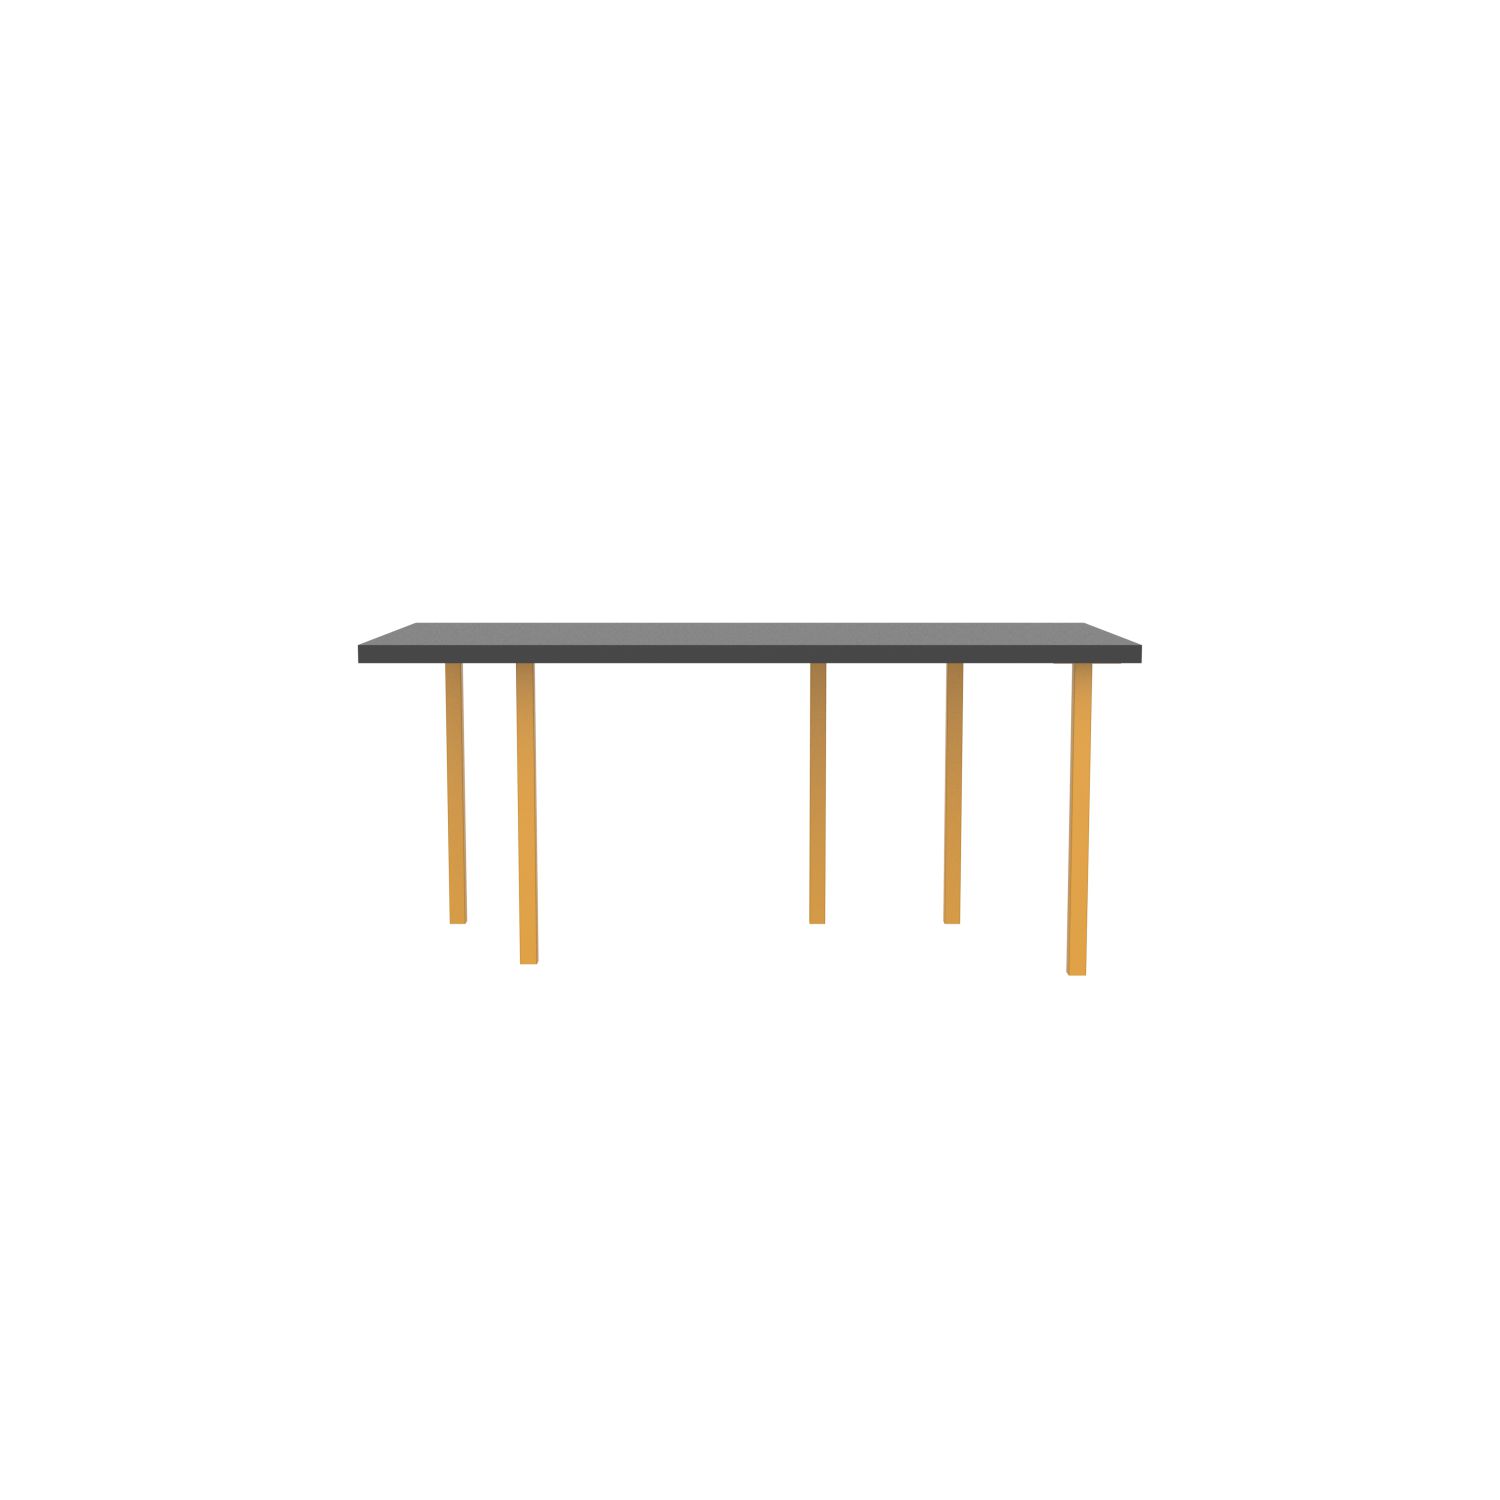 lensvelt bbrand table five fixed heigt 80x172 hpl black 50 mm price level 1 yellow ral1004